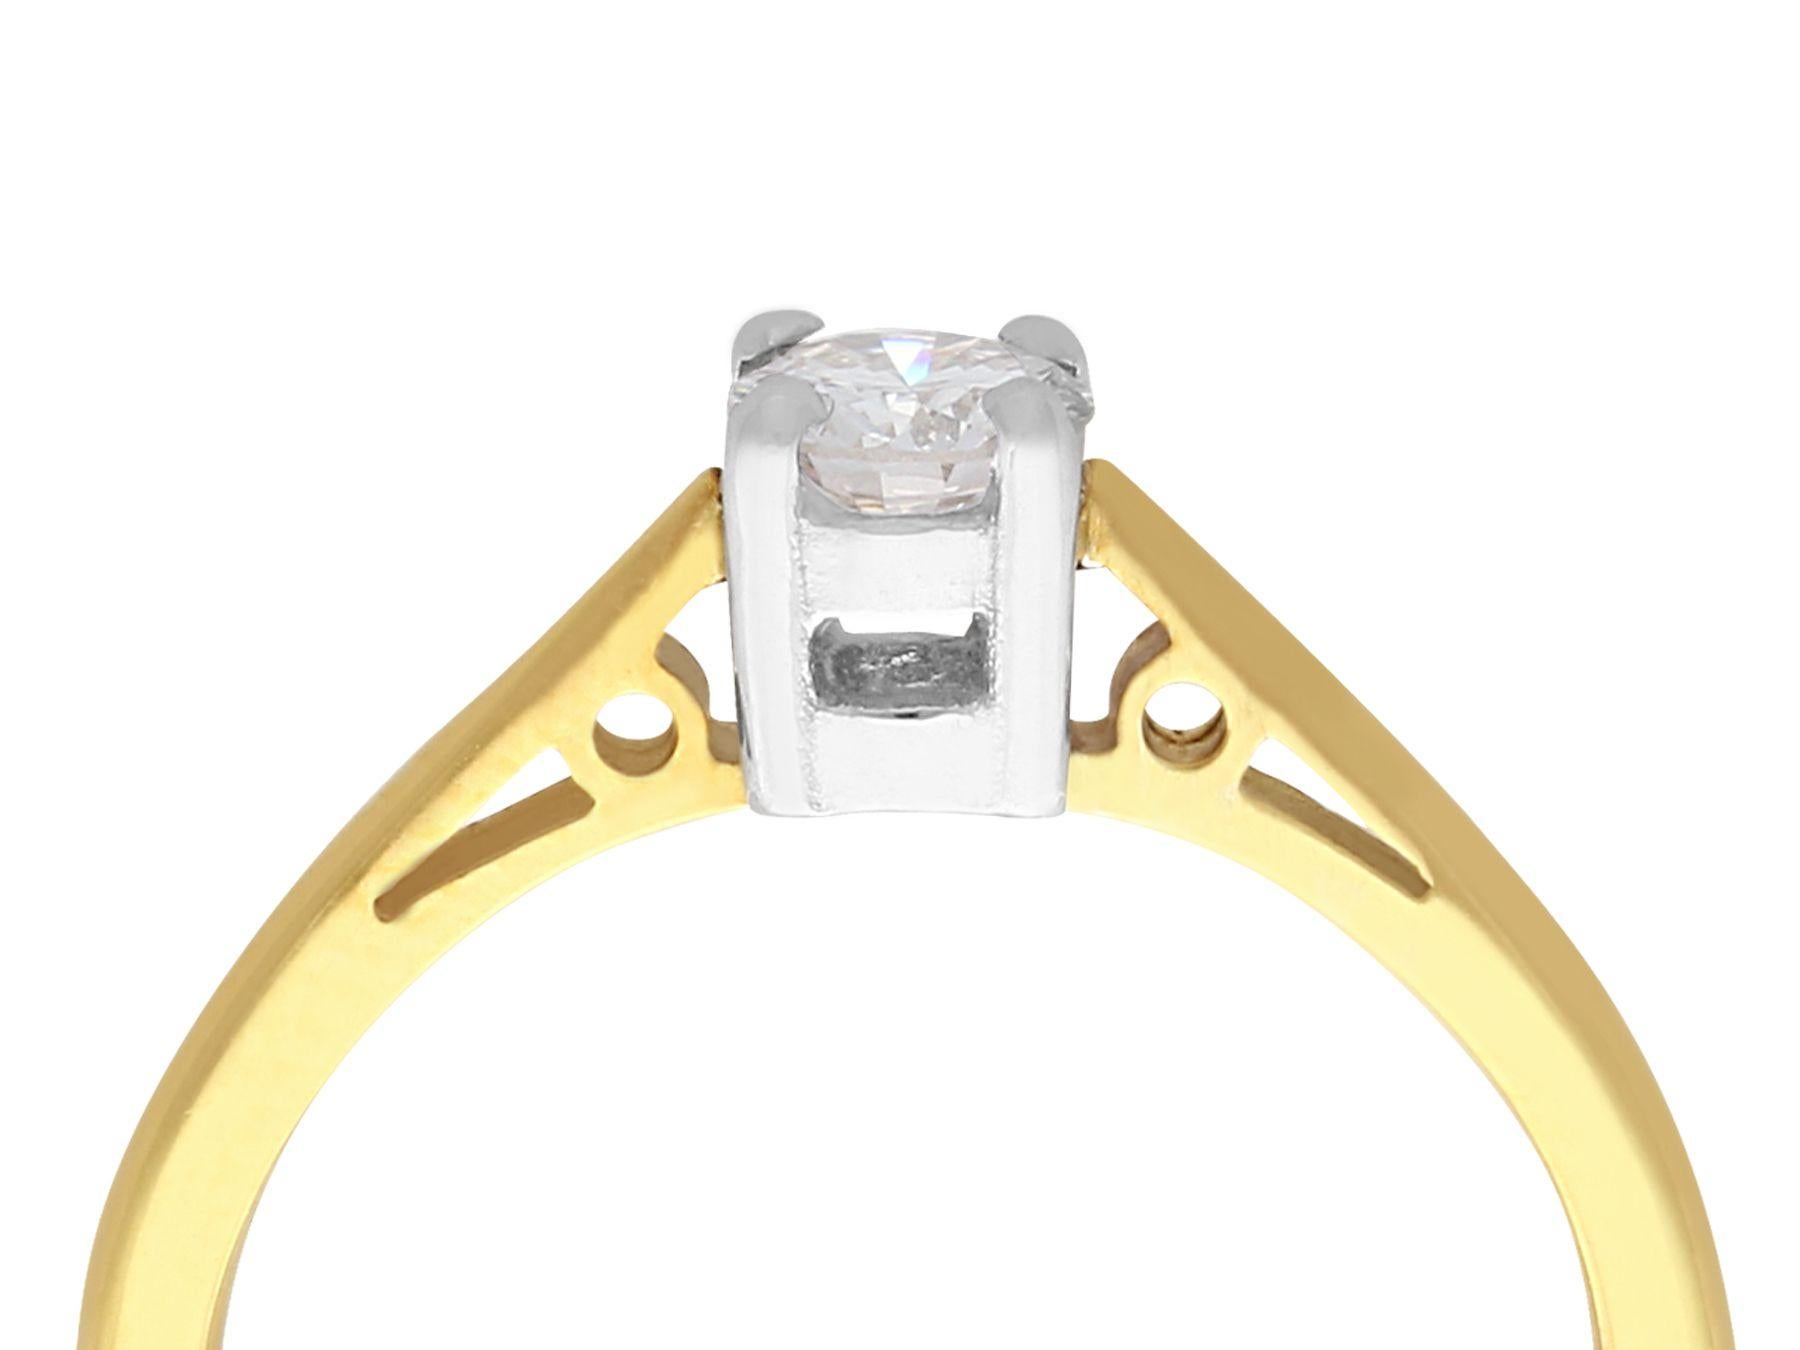 A fine and impressive vintage 0.28 carat diamond and 18 karat yellow gold, platinum set solitaire ring; part of our diamond jewelry/estate jewelry collections

This impressive vintage diamond solitaire ring has been crafted in 18k yellow gold with a